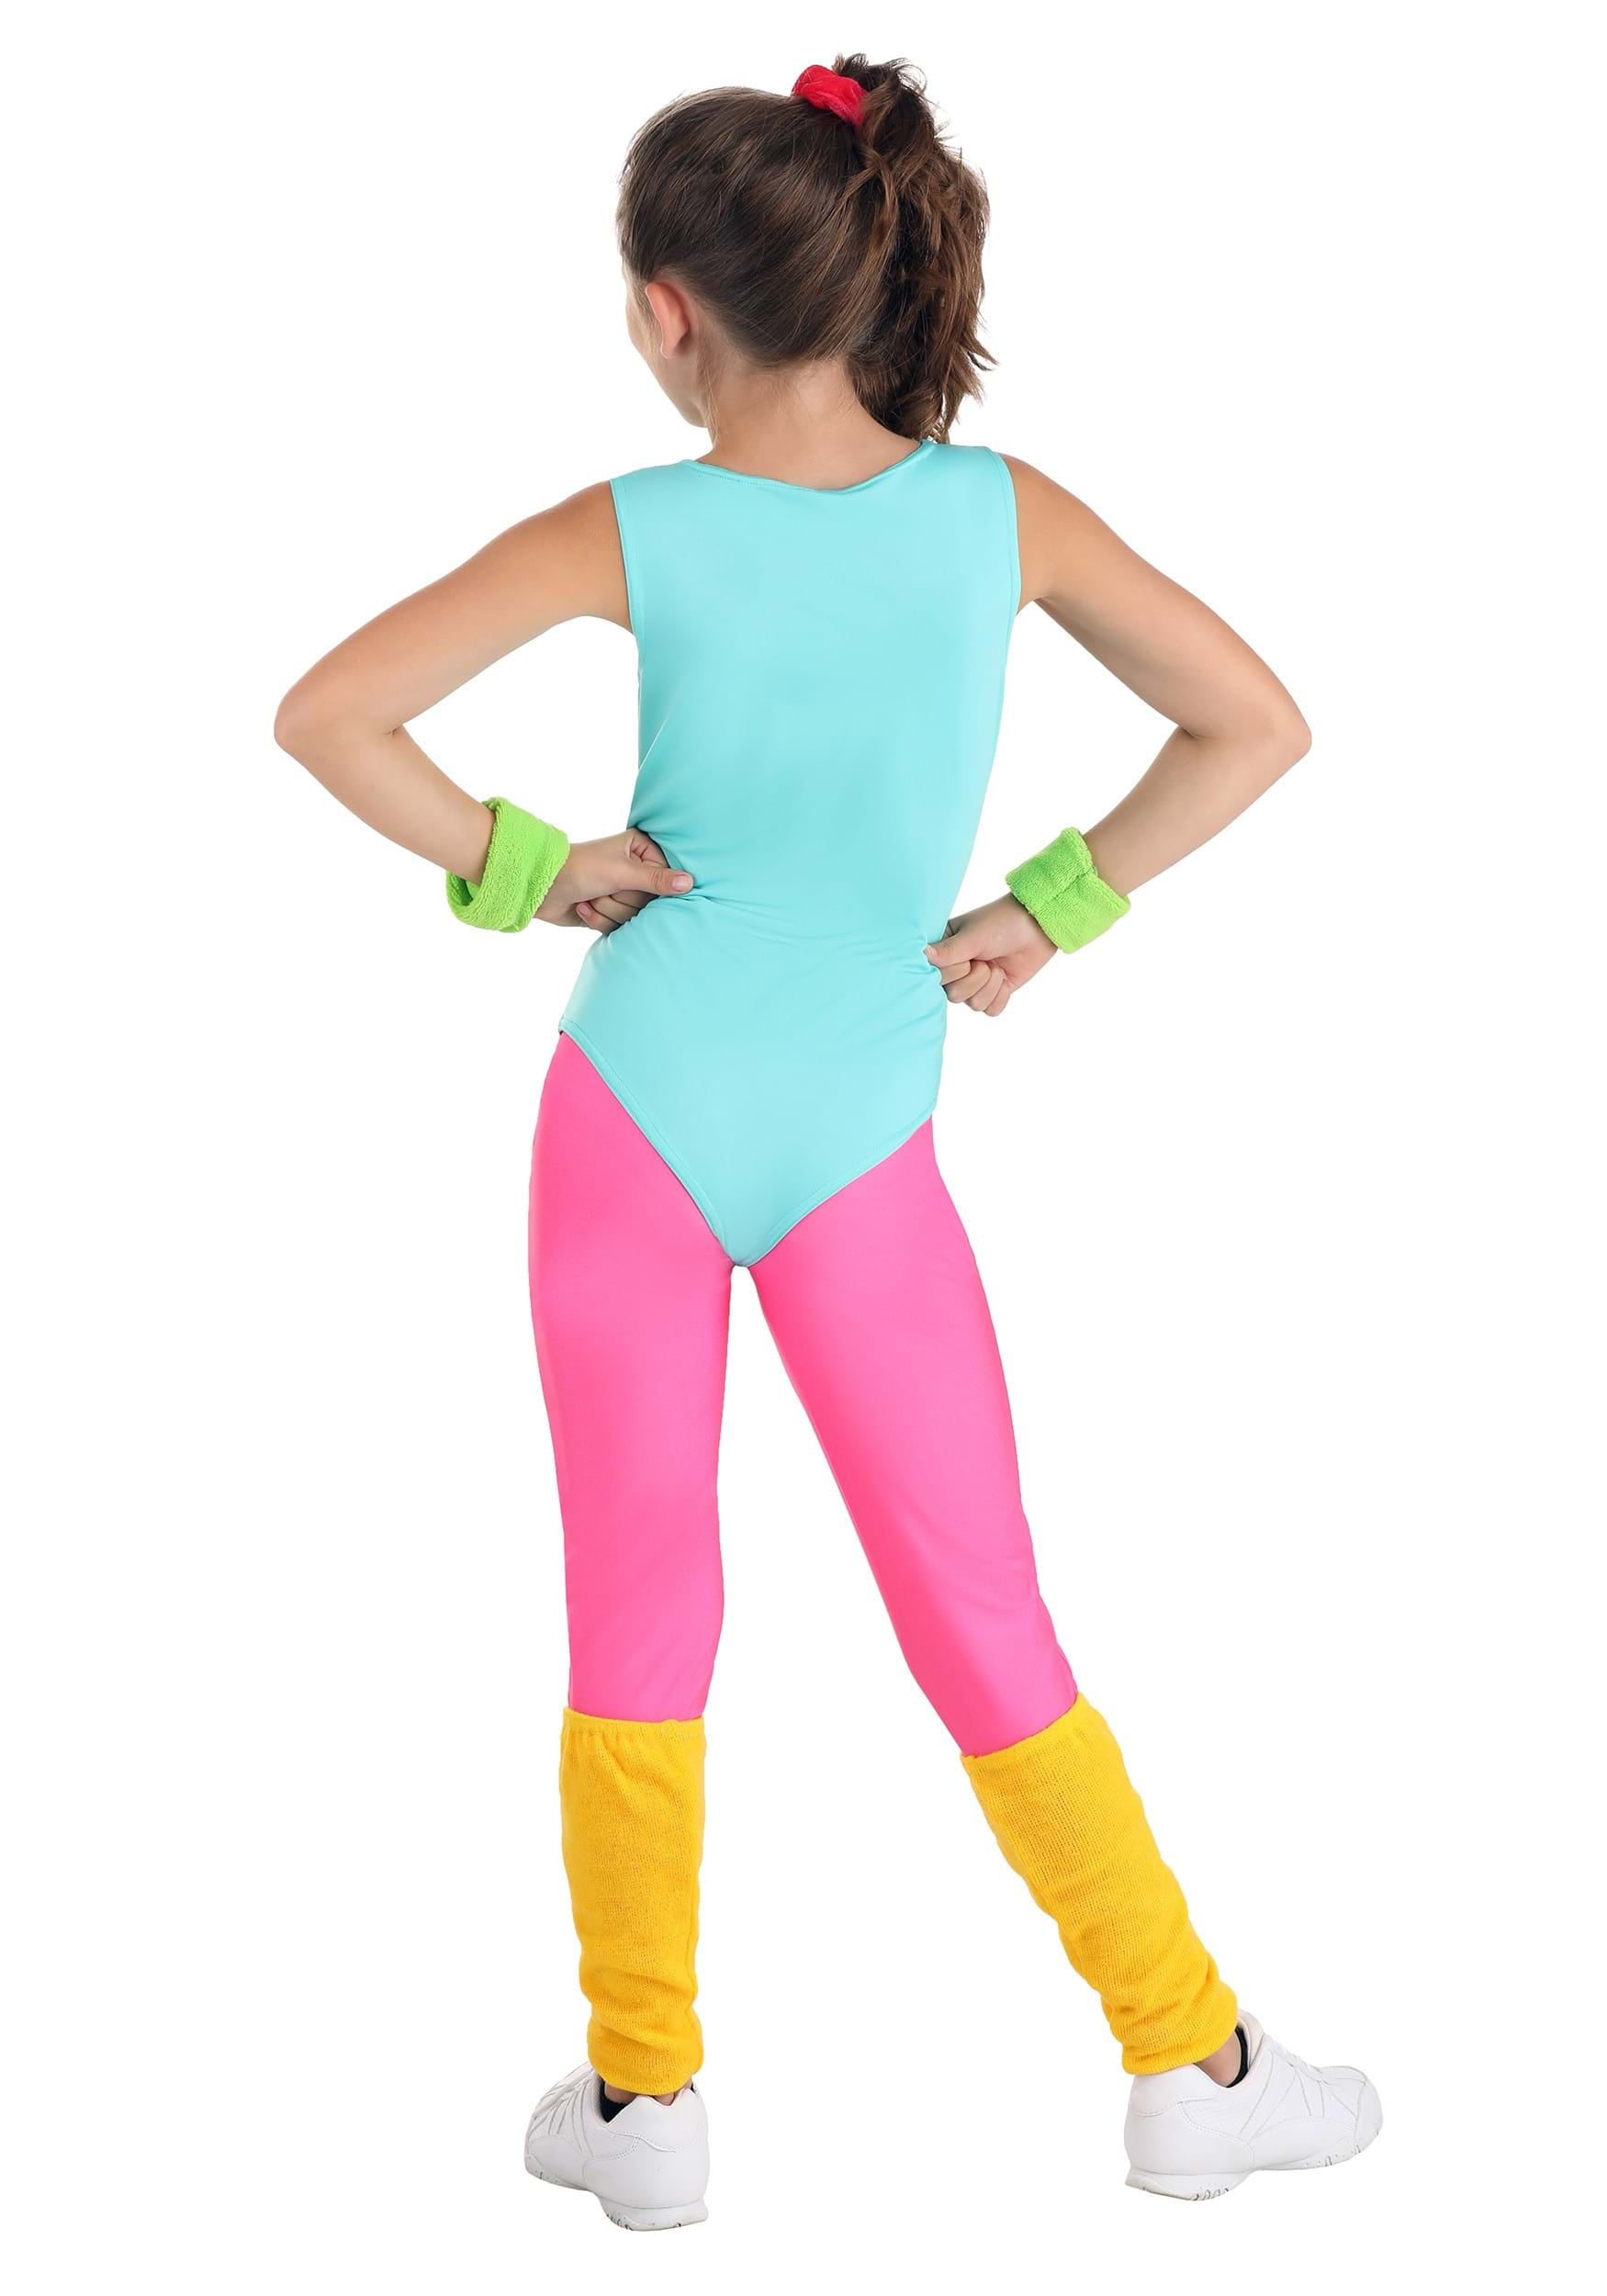 80s dance  80s workout outfit, Womens workout outfits, 80s workout